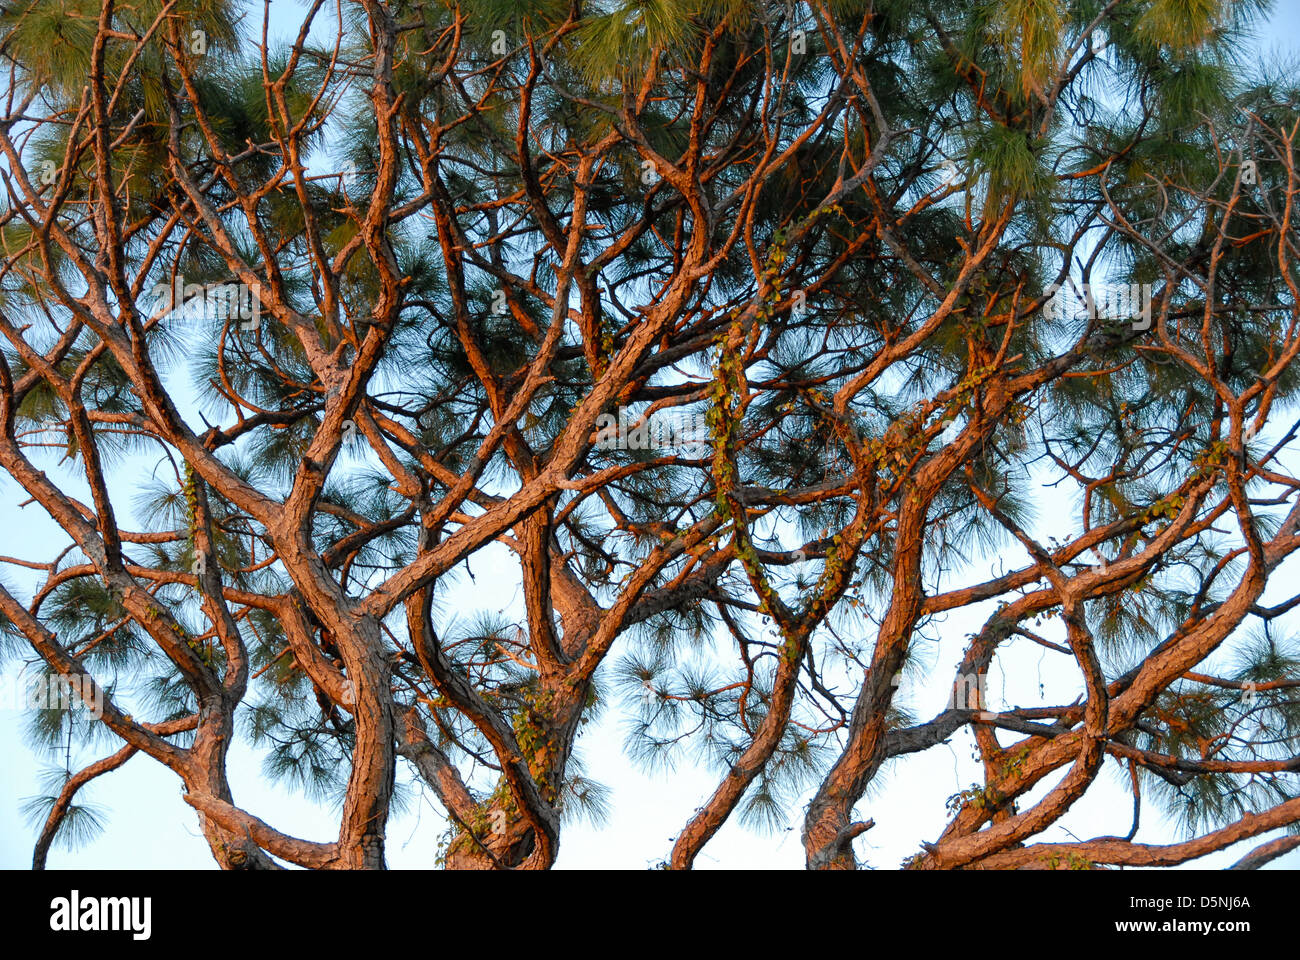 A South Florida pine tree raising its wild, twisted branches in the late afternoon sunlight. (USA) Stock Photo